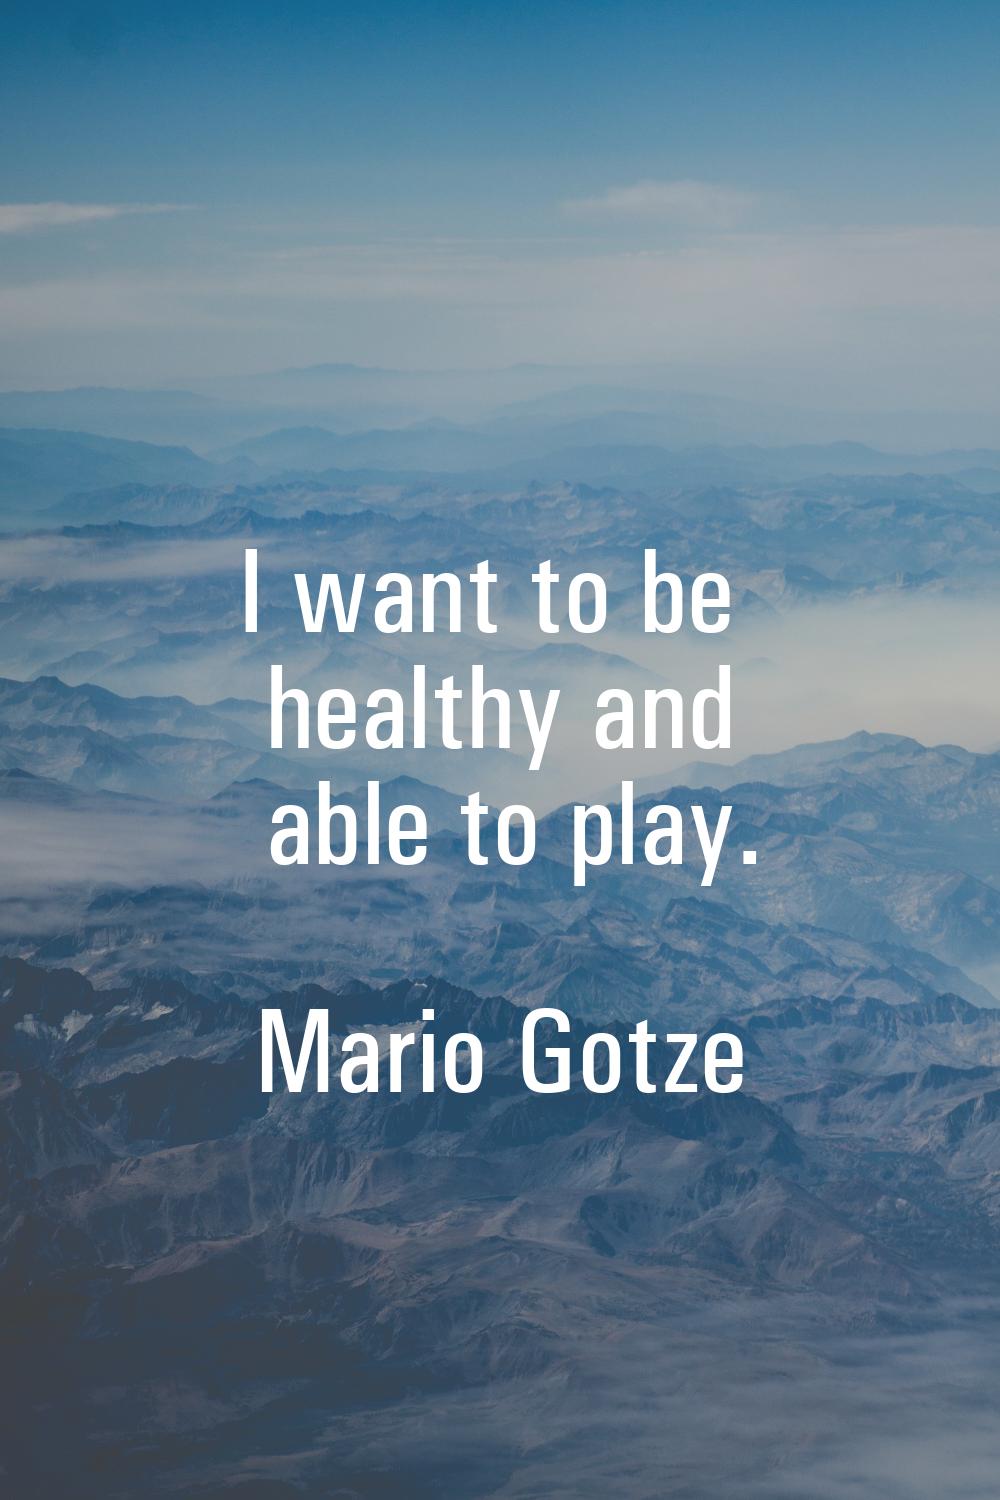 I want to be healthy and able to play.